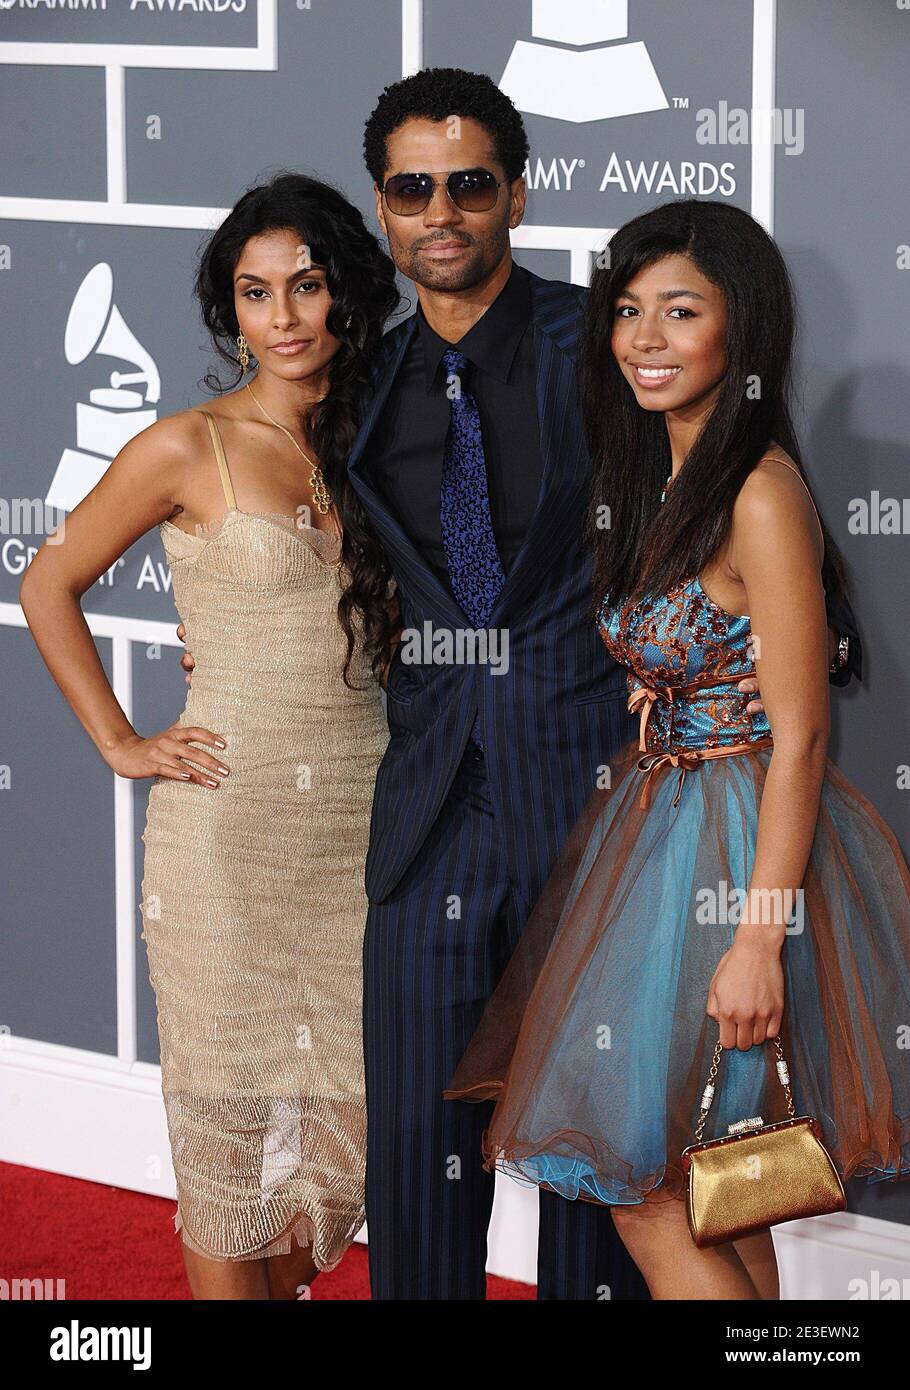 Eric Benet, Manuela Testolini (left) and daughter India arriving at the 51st Annual Grammy Awards, held at the Staples Center in Los Angeles, CA, USA on February 8, 2009. Photo by Lionel Hahn/ABACAPRESS.COM Stock Photo